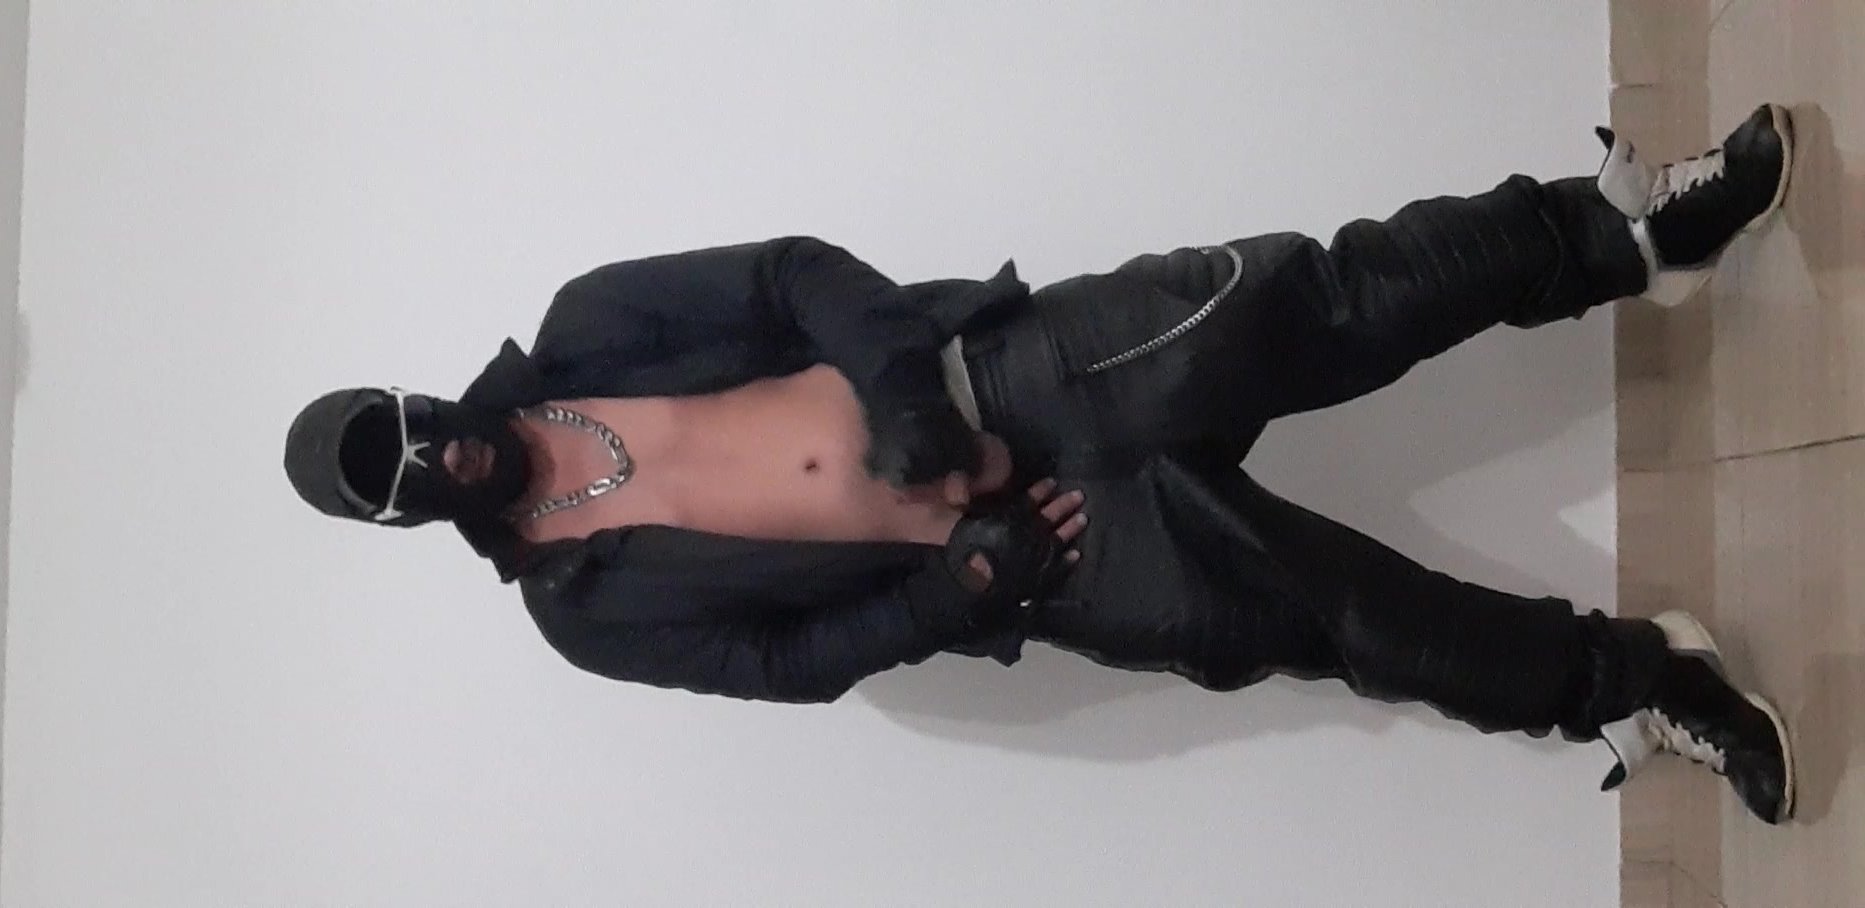 Full leather saggers ,sneakers and smoking - video 2